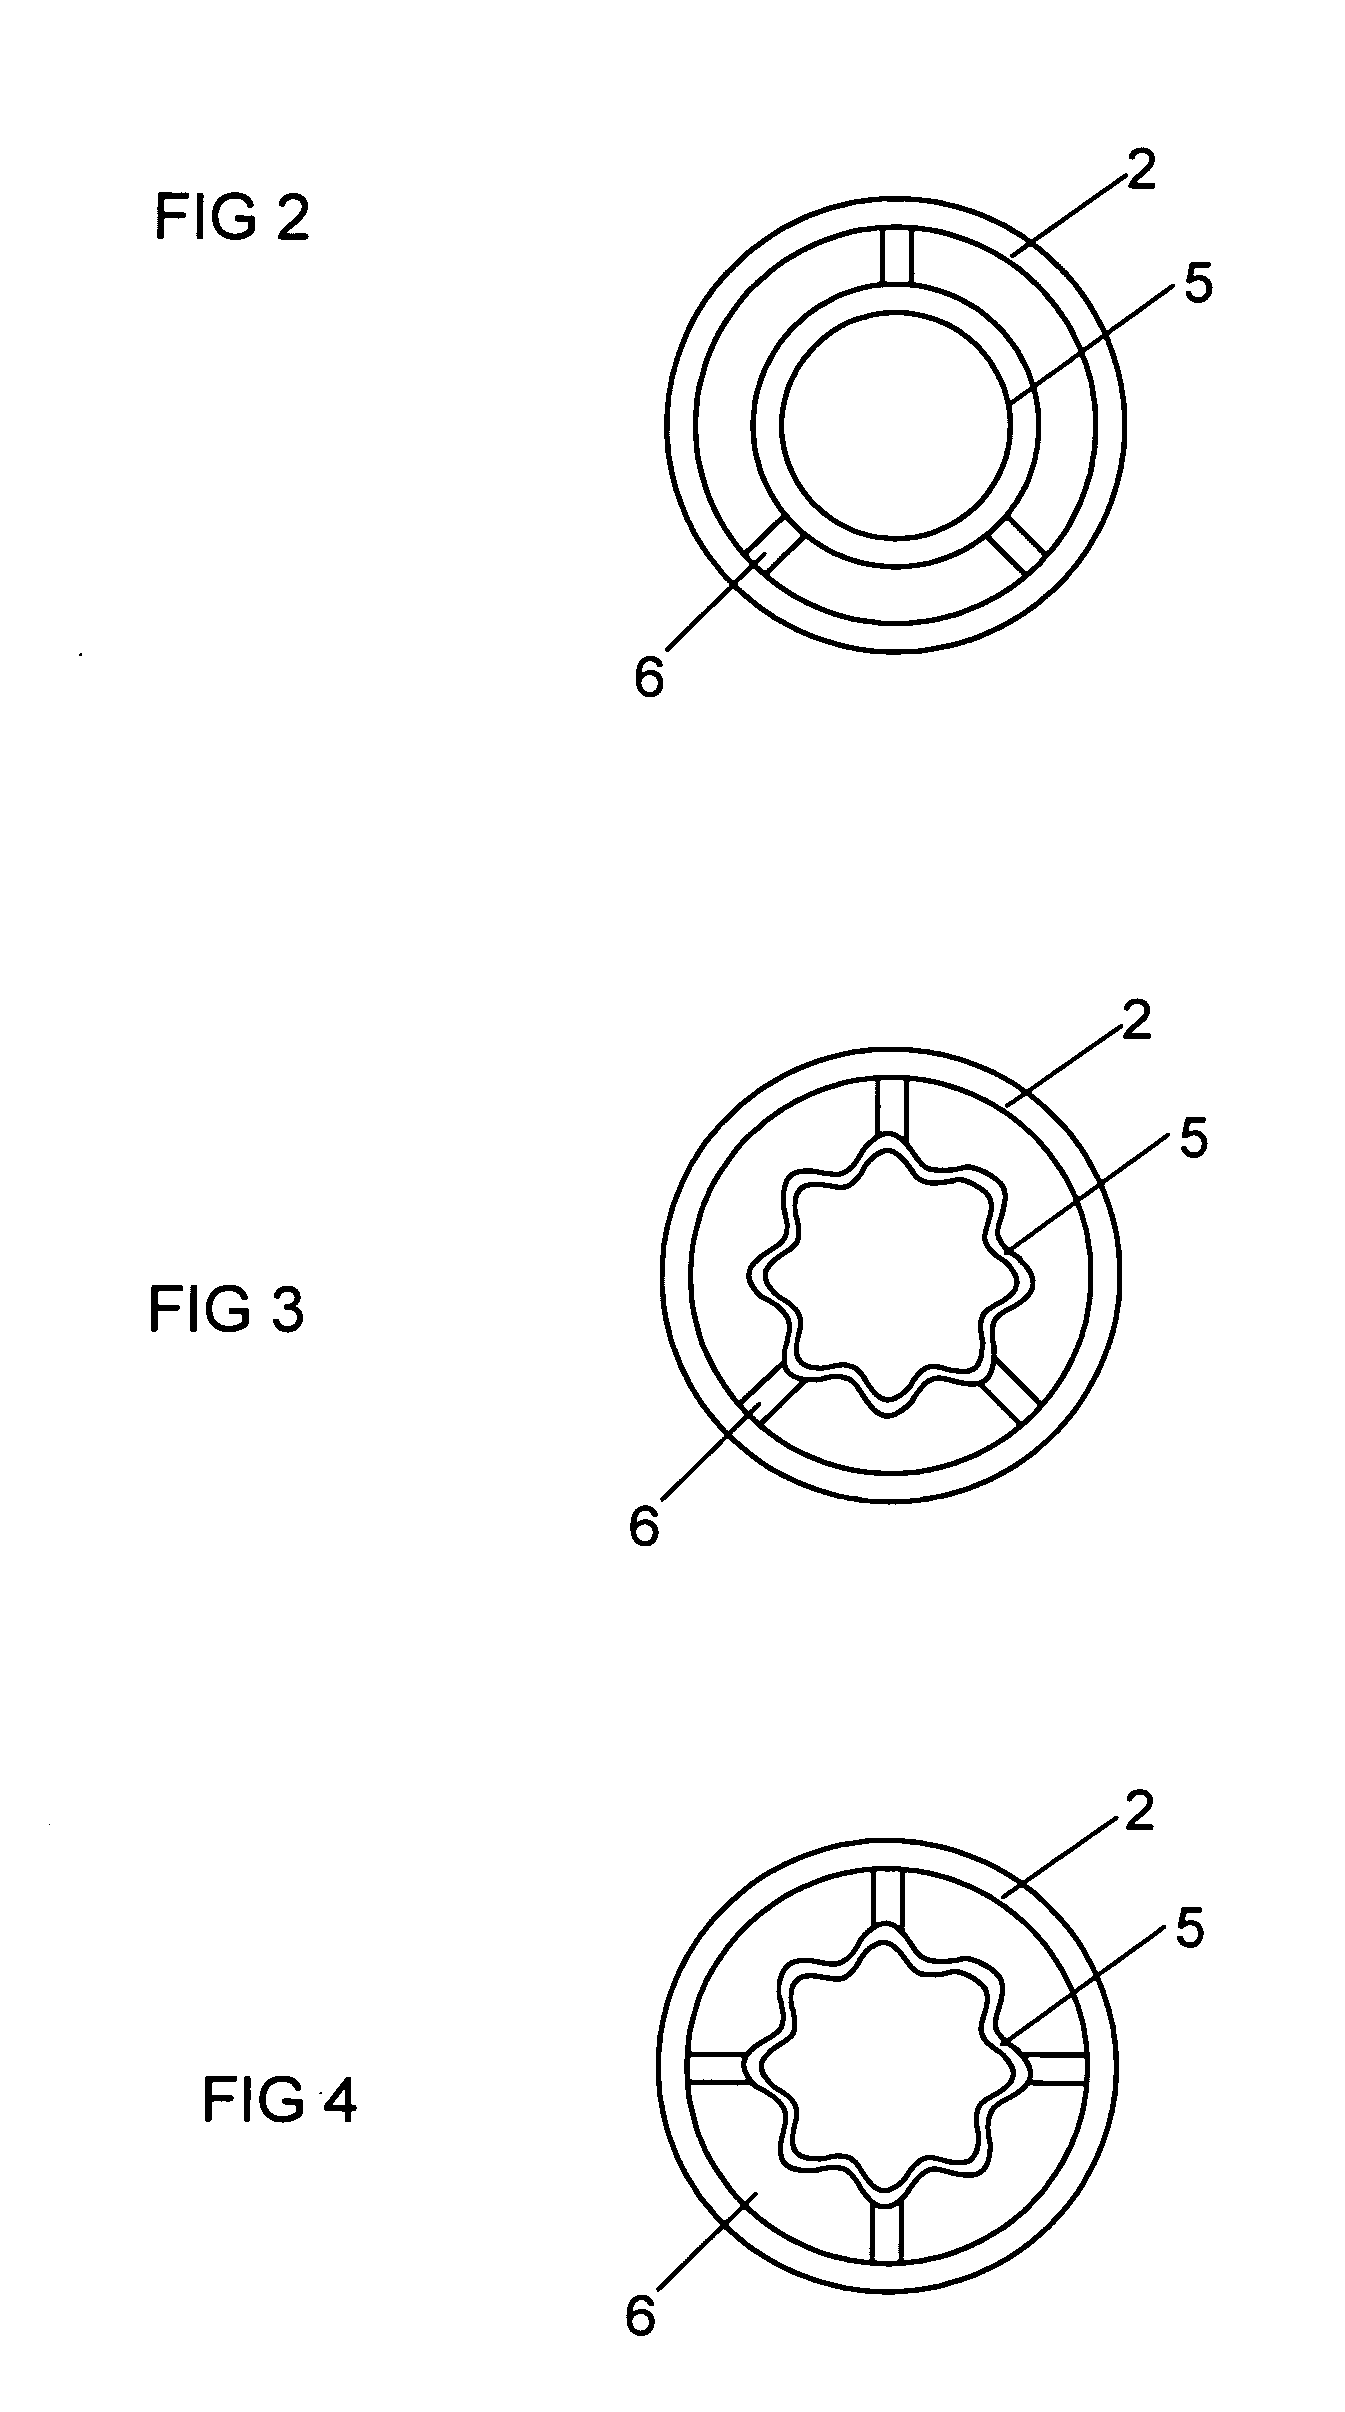 Method and system for injection of a solution into a gas stream